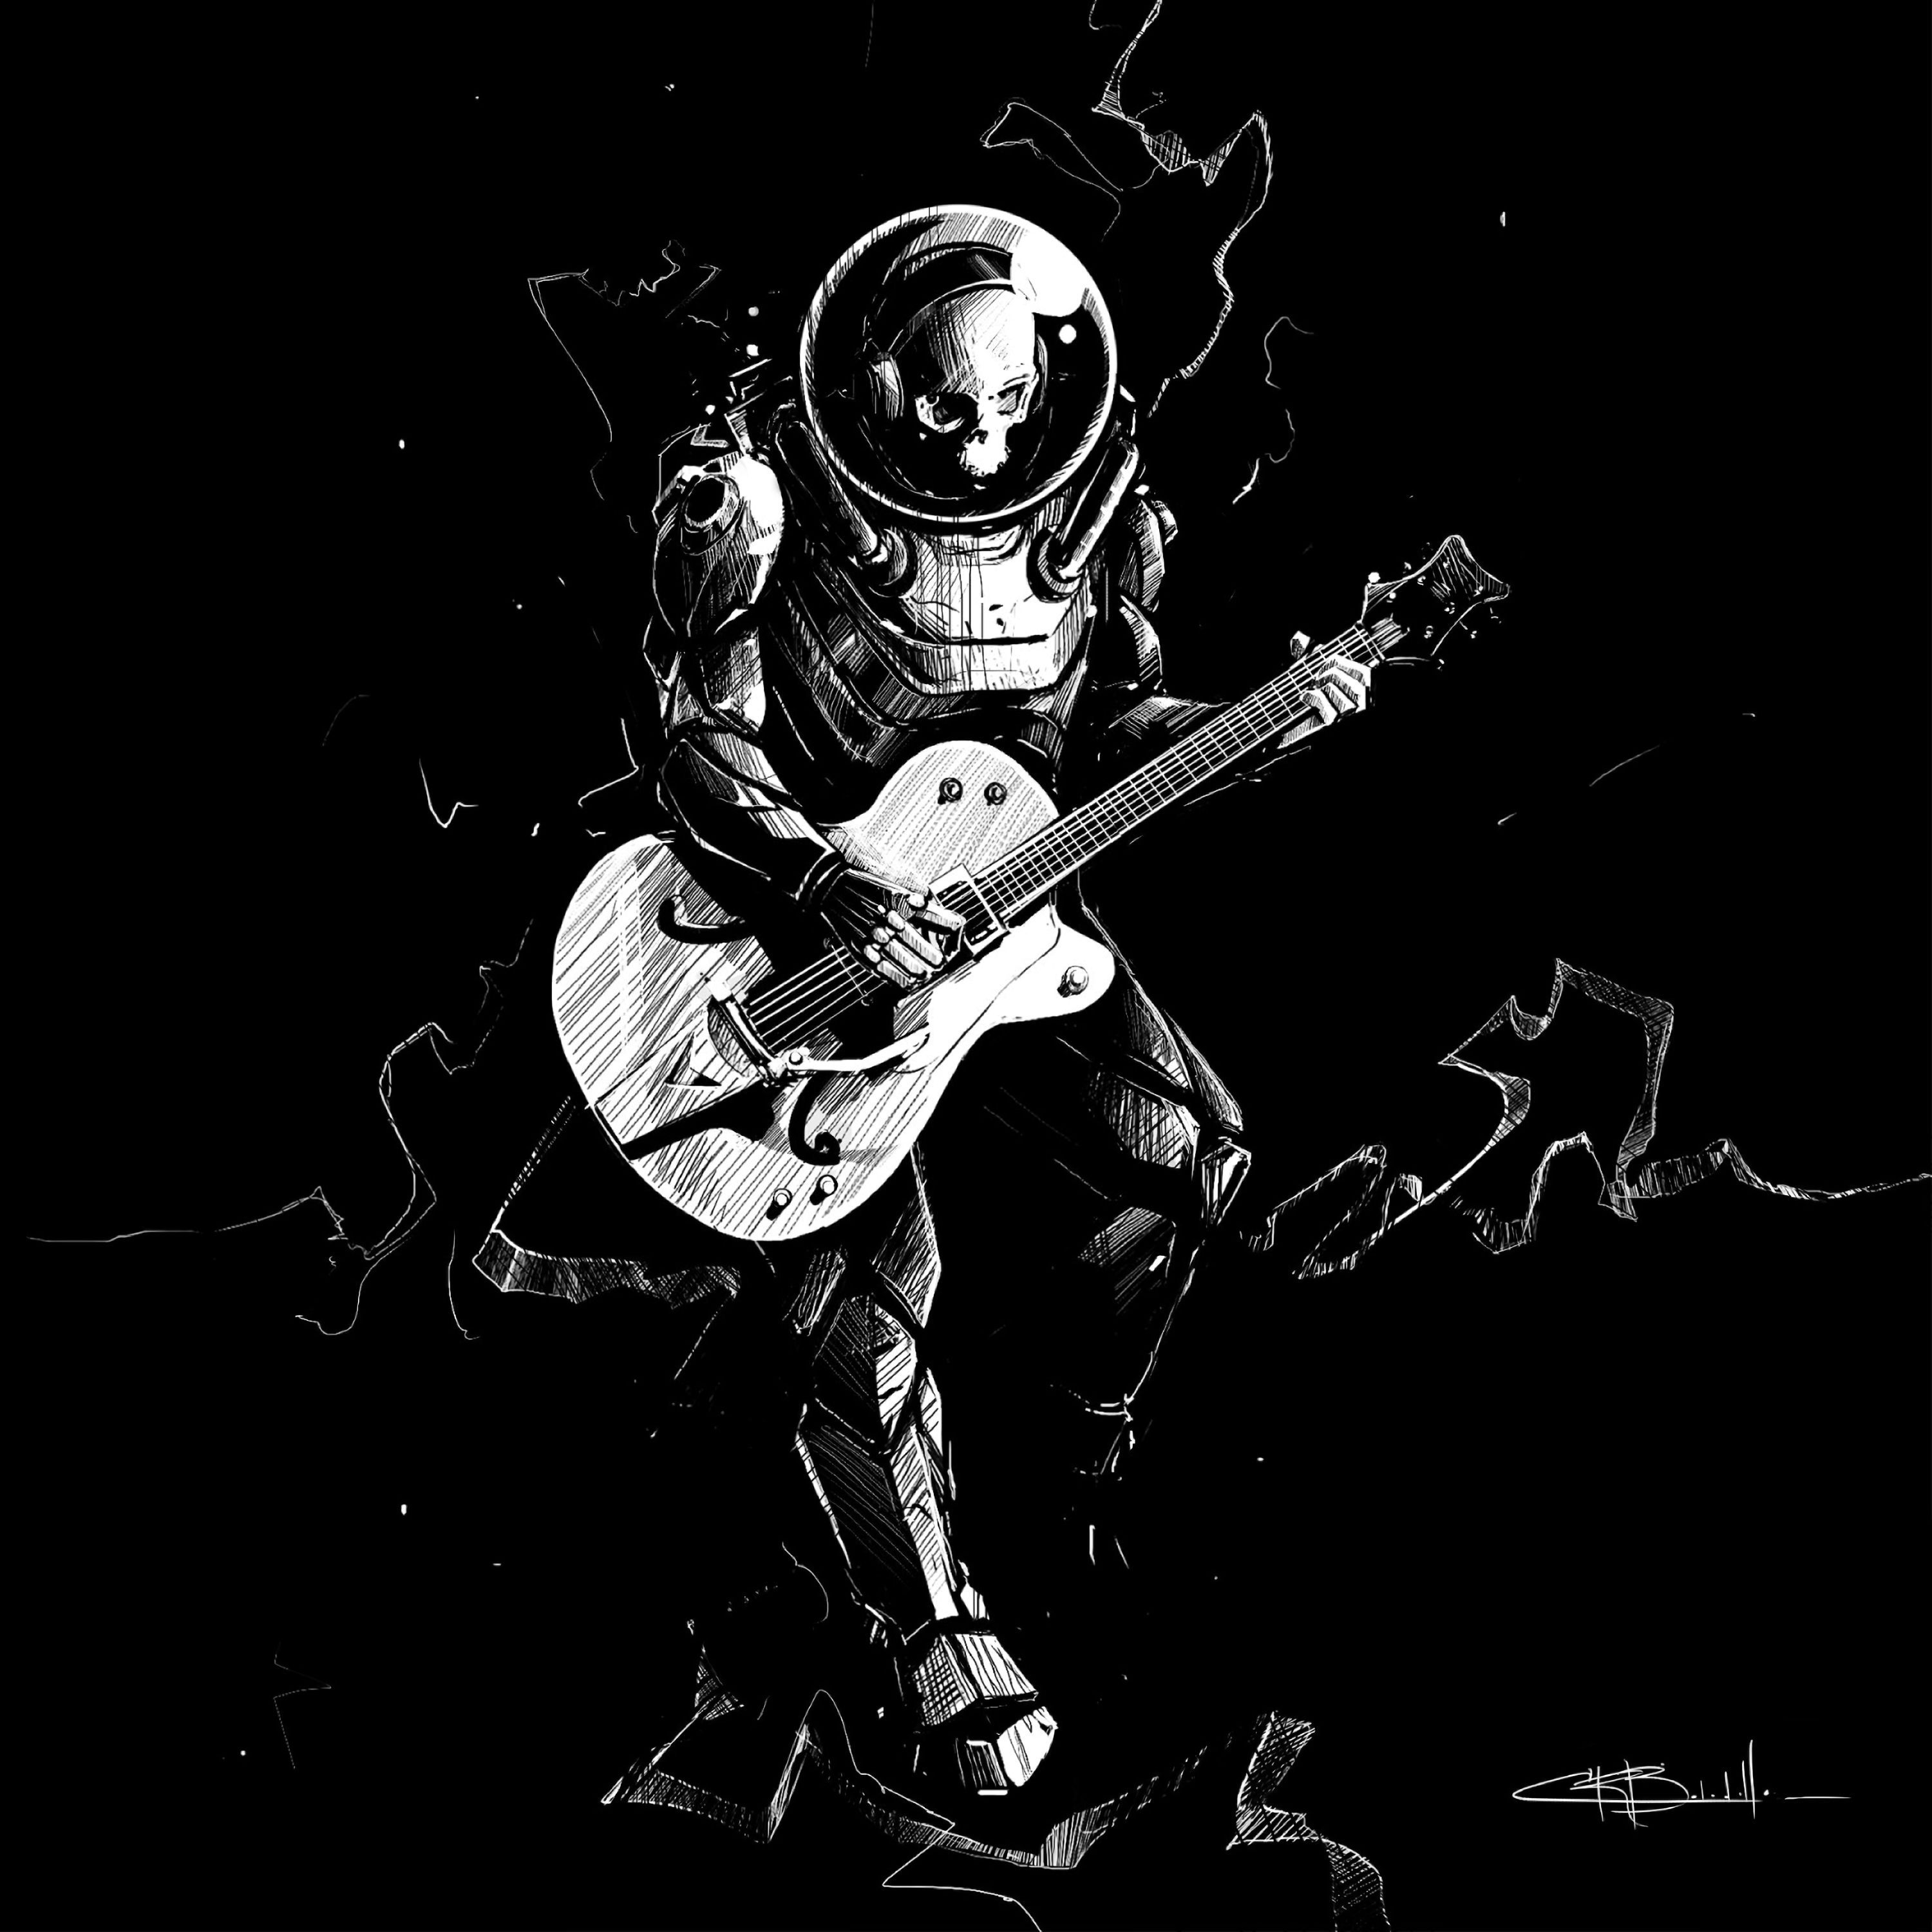 A black and white drawing of an astronaut playing guitar - Guitar, astronaut, skeleton